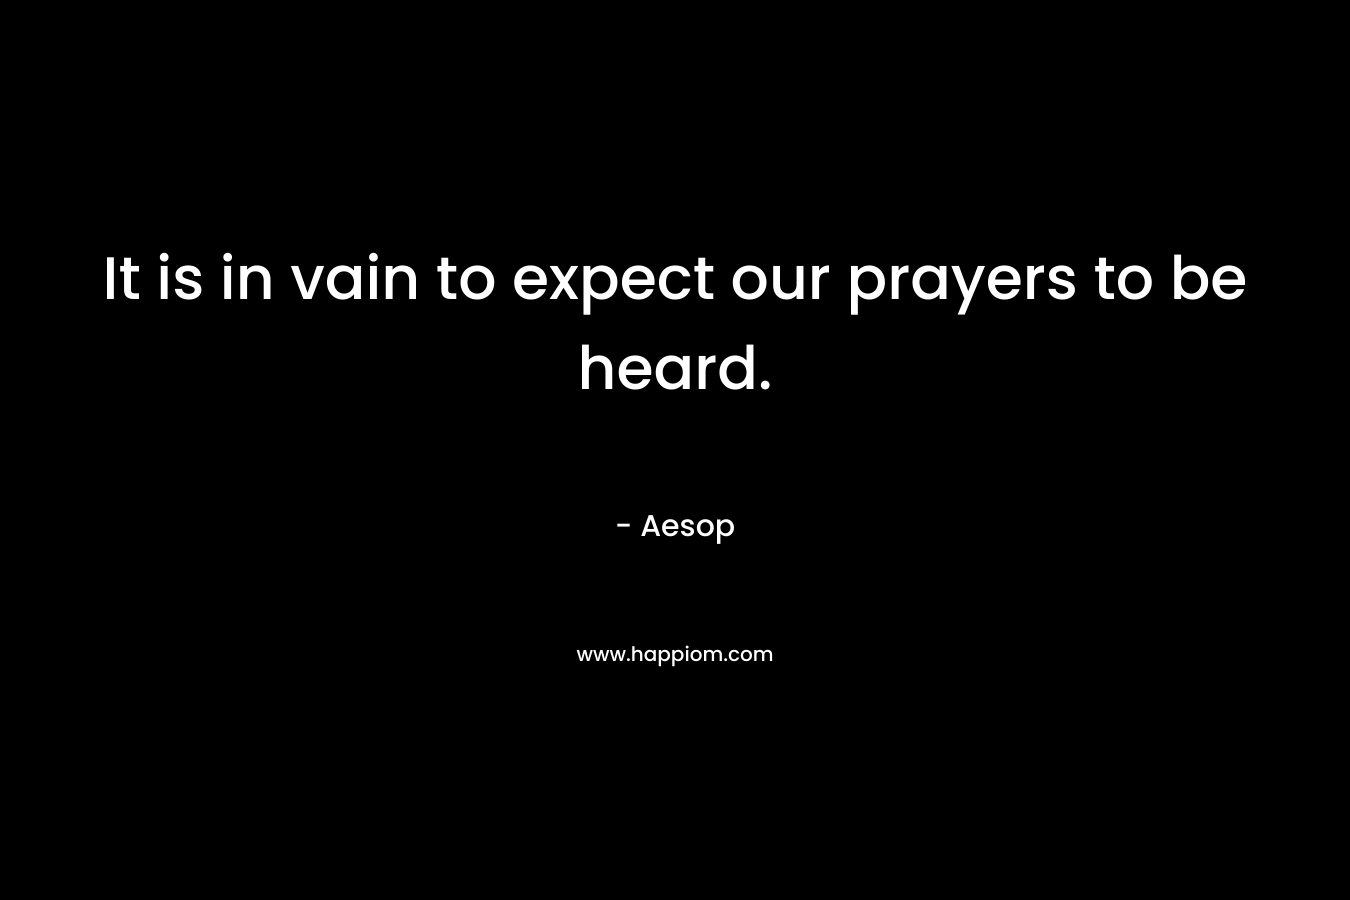 It is in vain to expect our prayers to be heard.